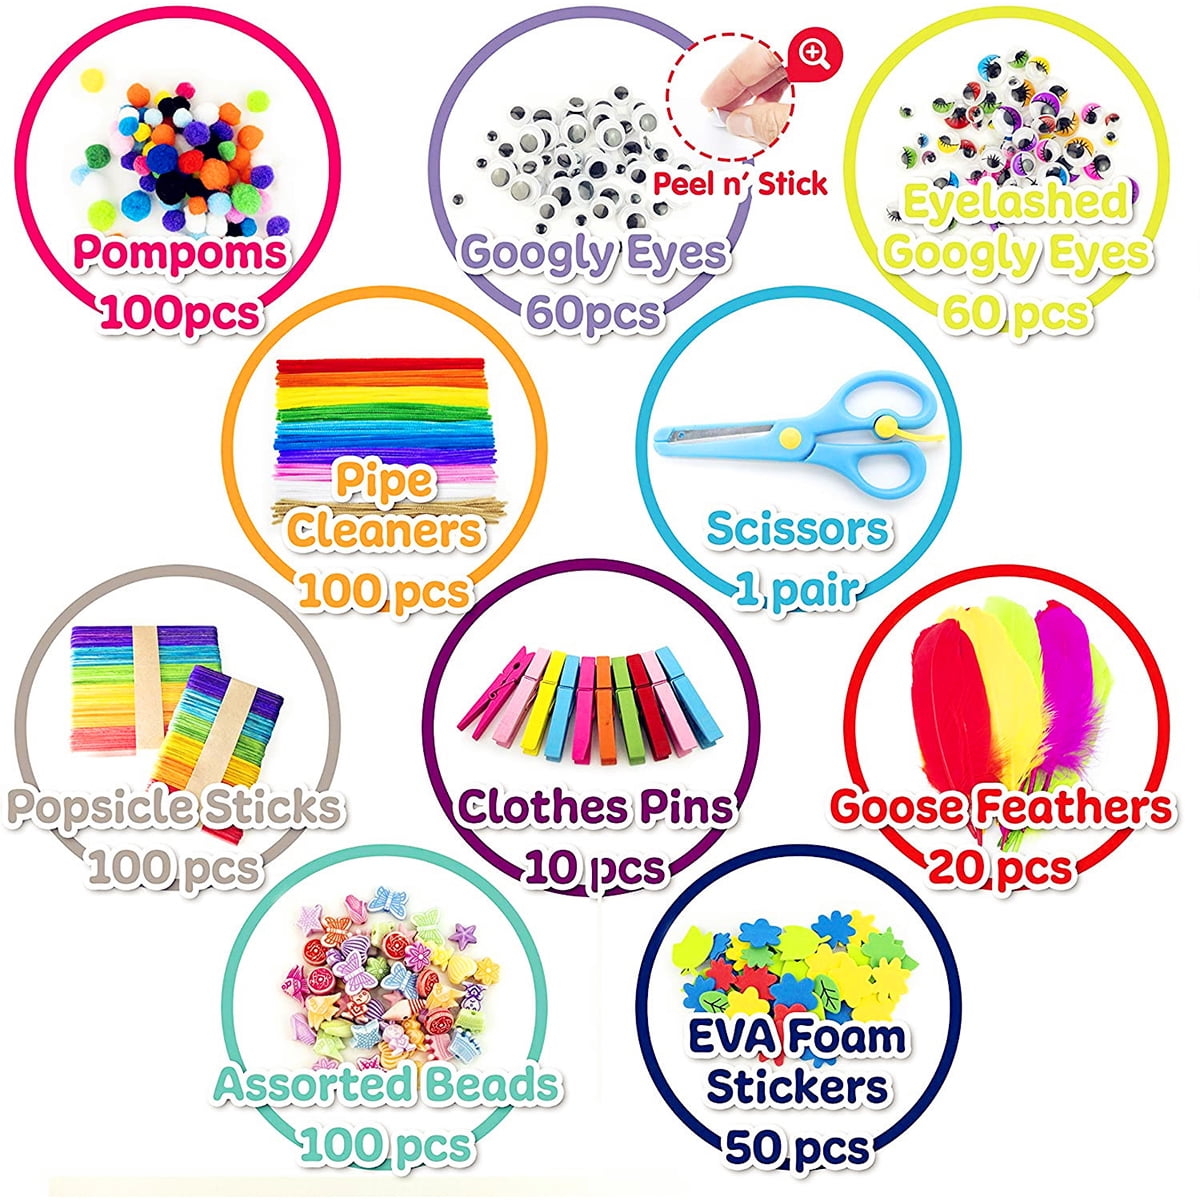 Kids Art Kit and Craft Supplies, 1000+ Pieces Foam, Pompoms, Feathers,  Cardstock, PACK - Kroger